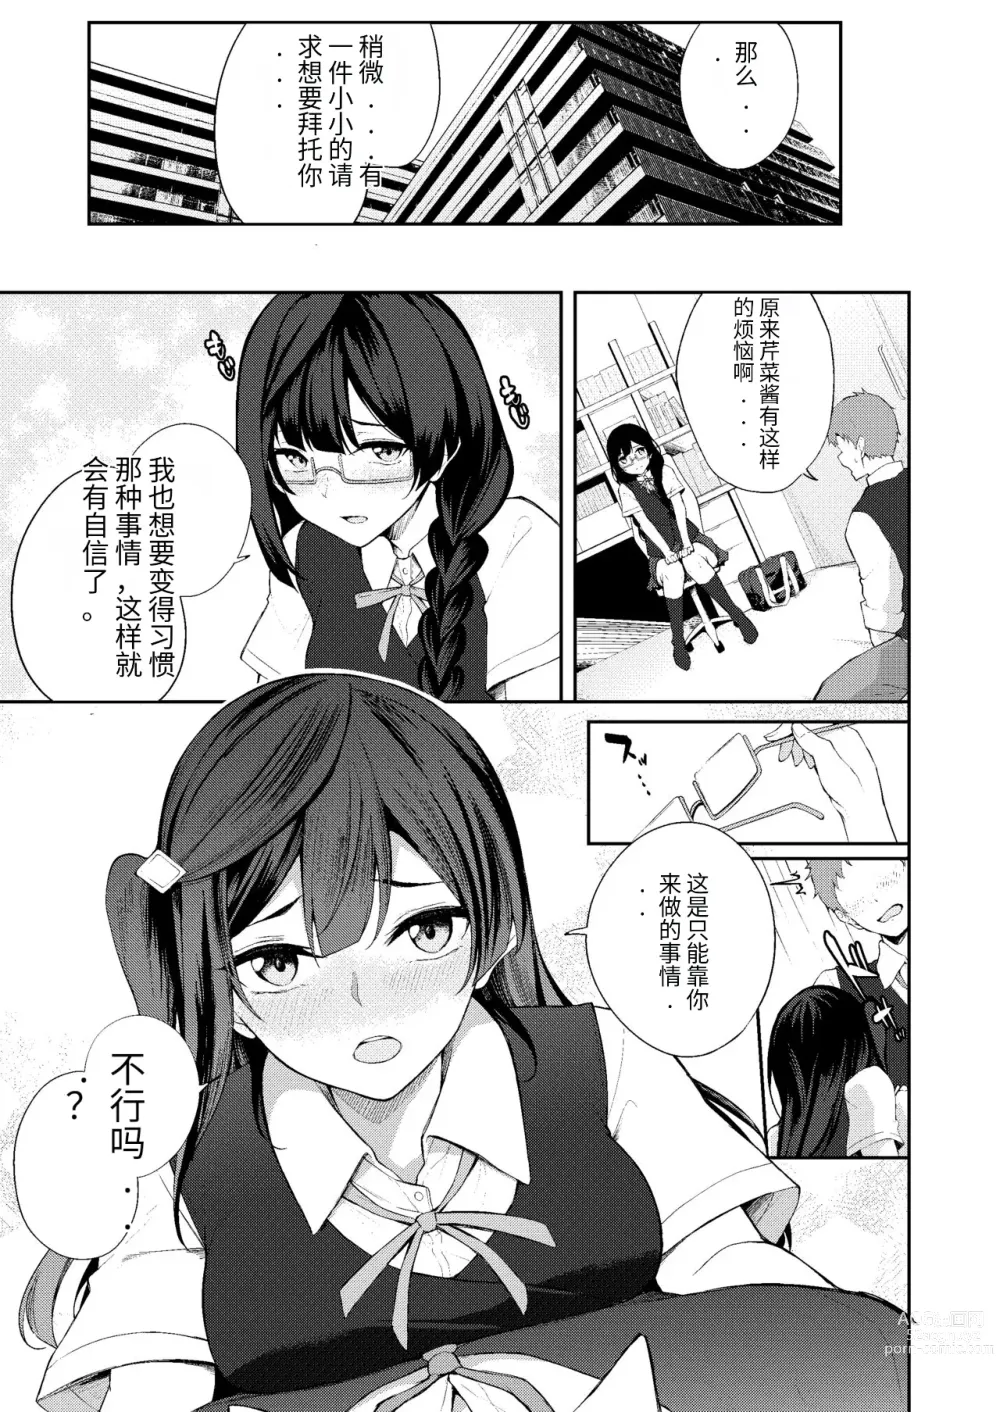 Page 4 of doujinshi Sunny Scarlet